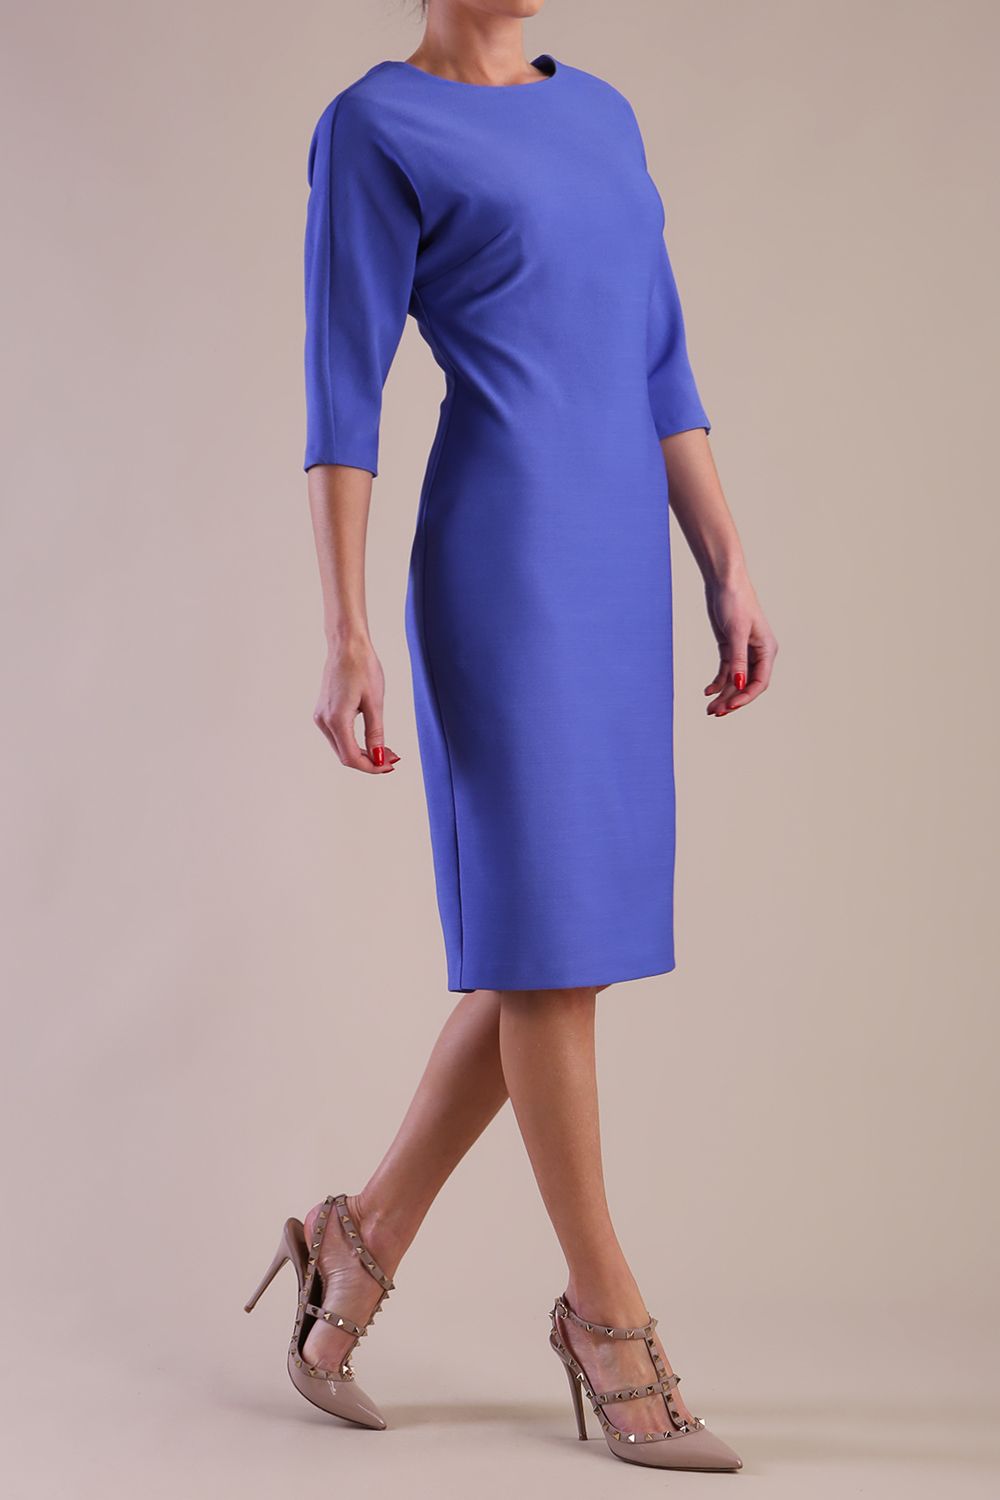 Model wearing diva catwalk Fulham 3/4 Sleeved pencil skirt dress with round neck in Thistle Blue